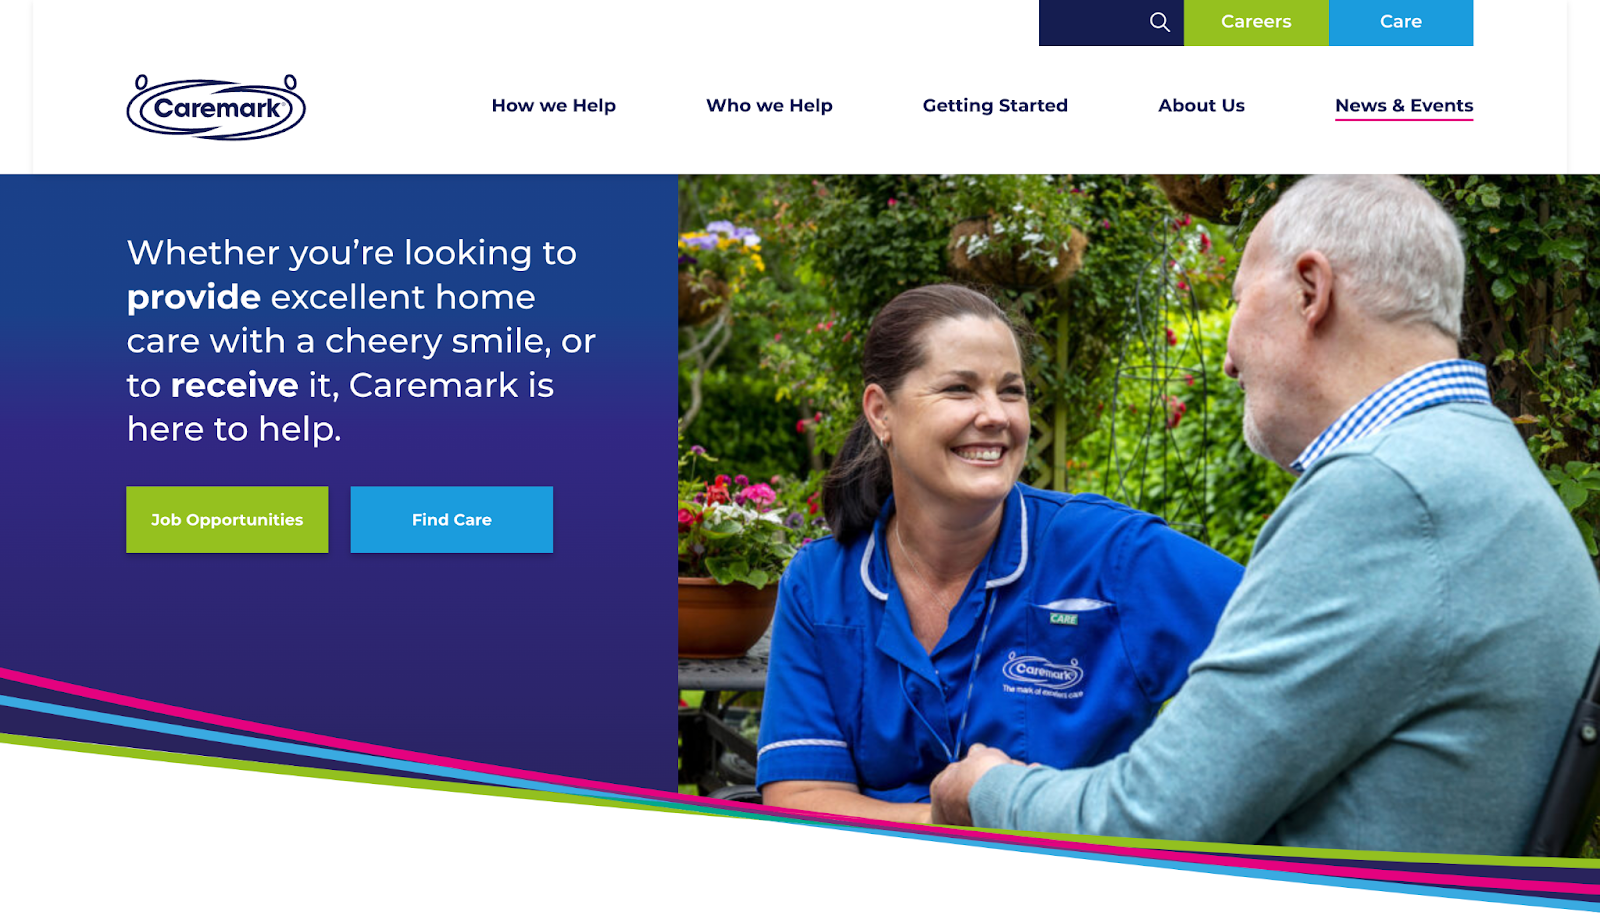 caremark home page - how to get clients for domiciliary care UK with attractive websites